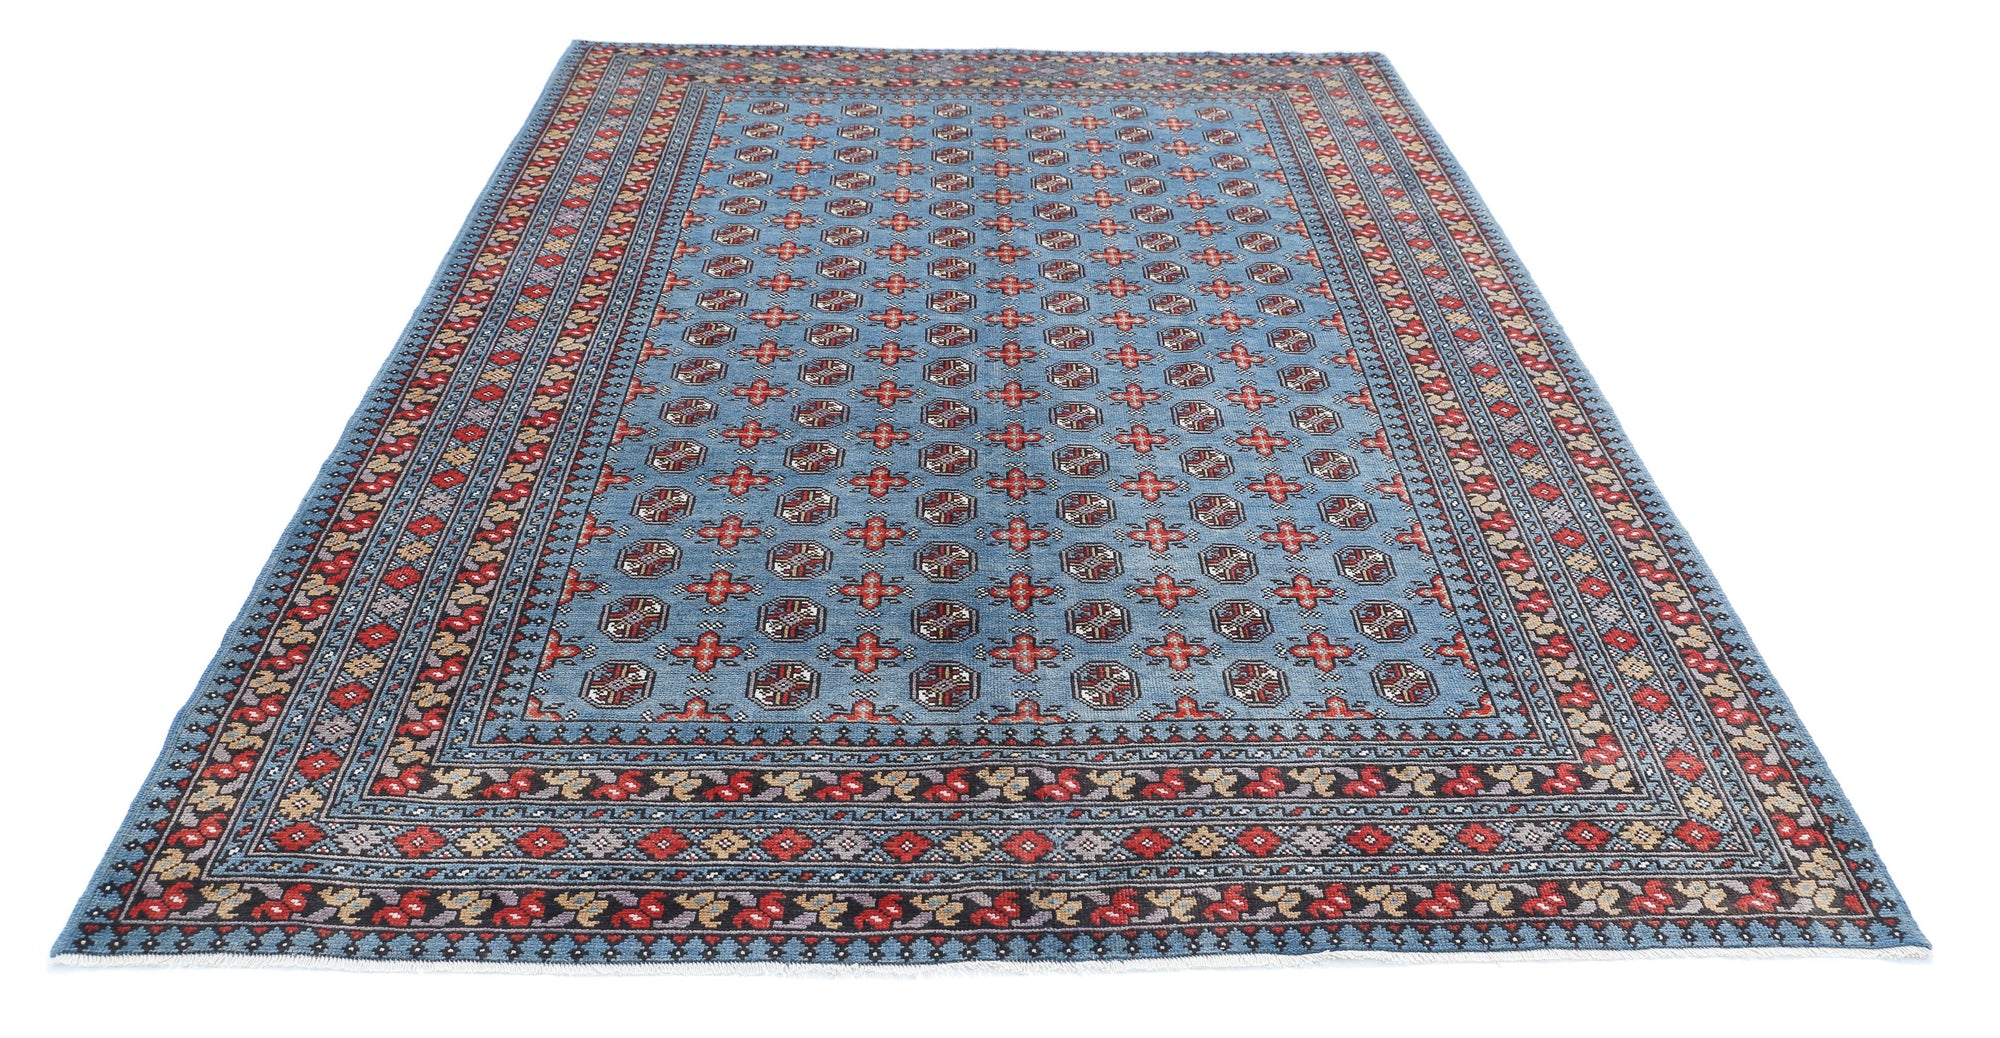 Revival-hand-knotted-gul-collection-wool-rug-5013960-3.jpg